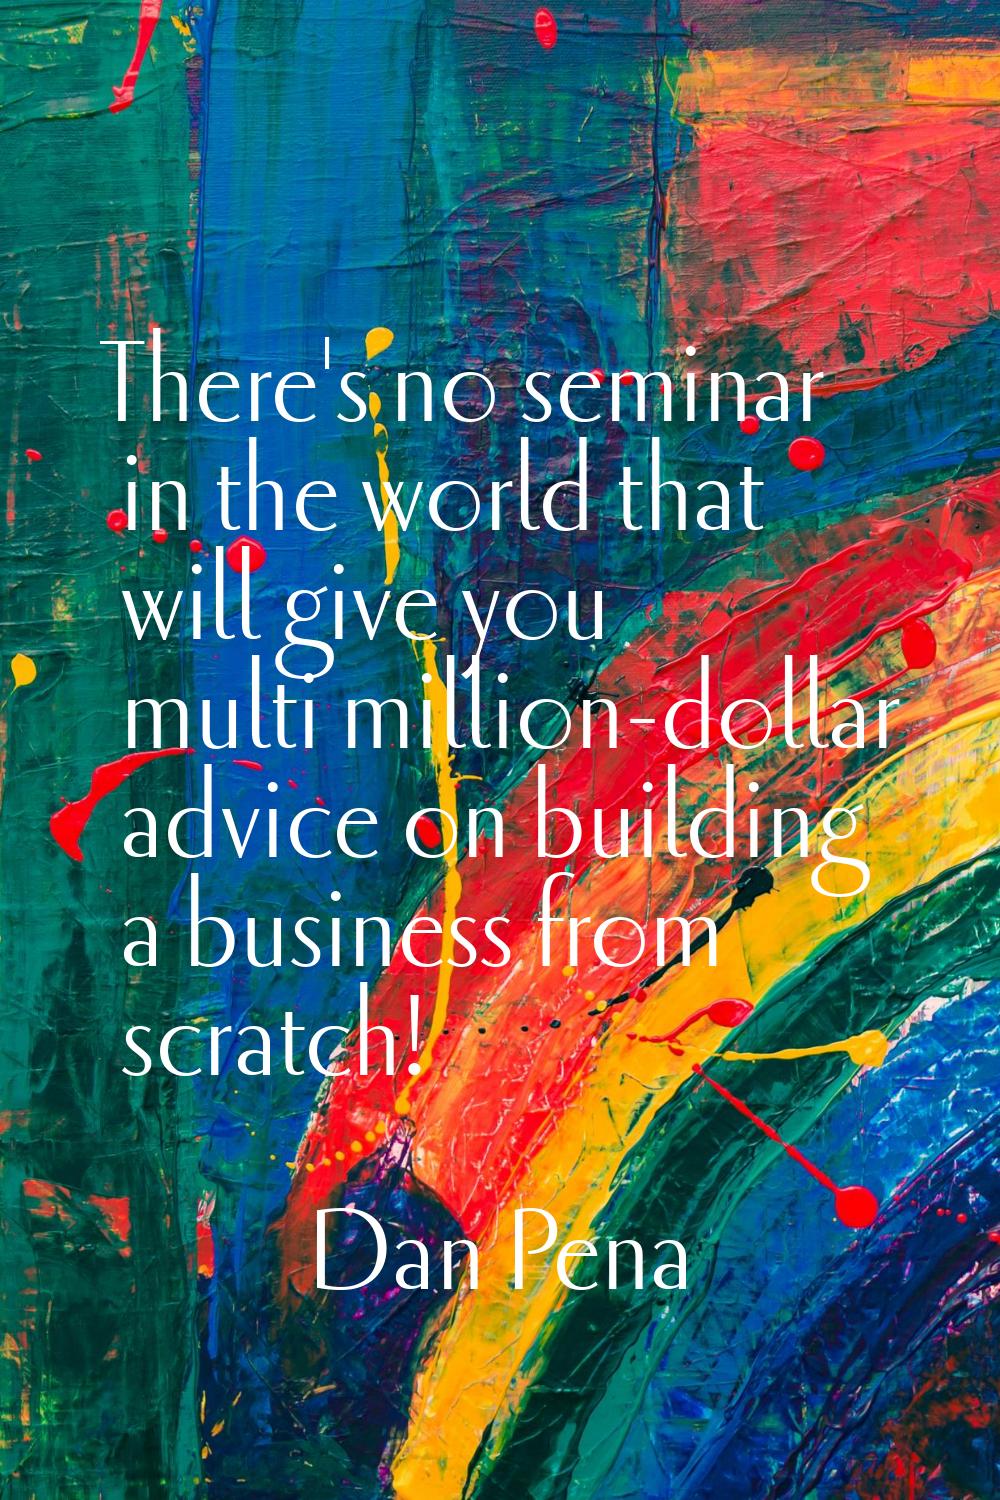 There's no seminar in the world that will give you multi million-dollar advice on building a busine